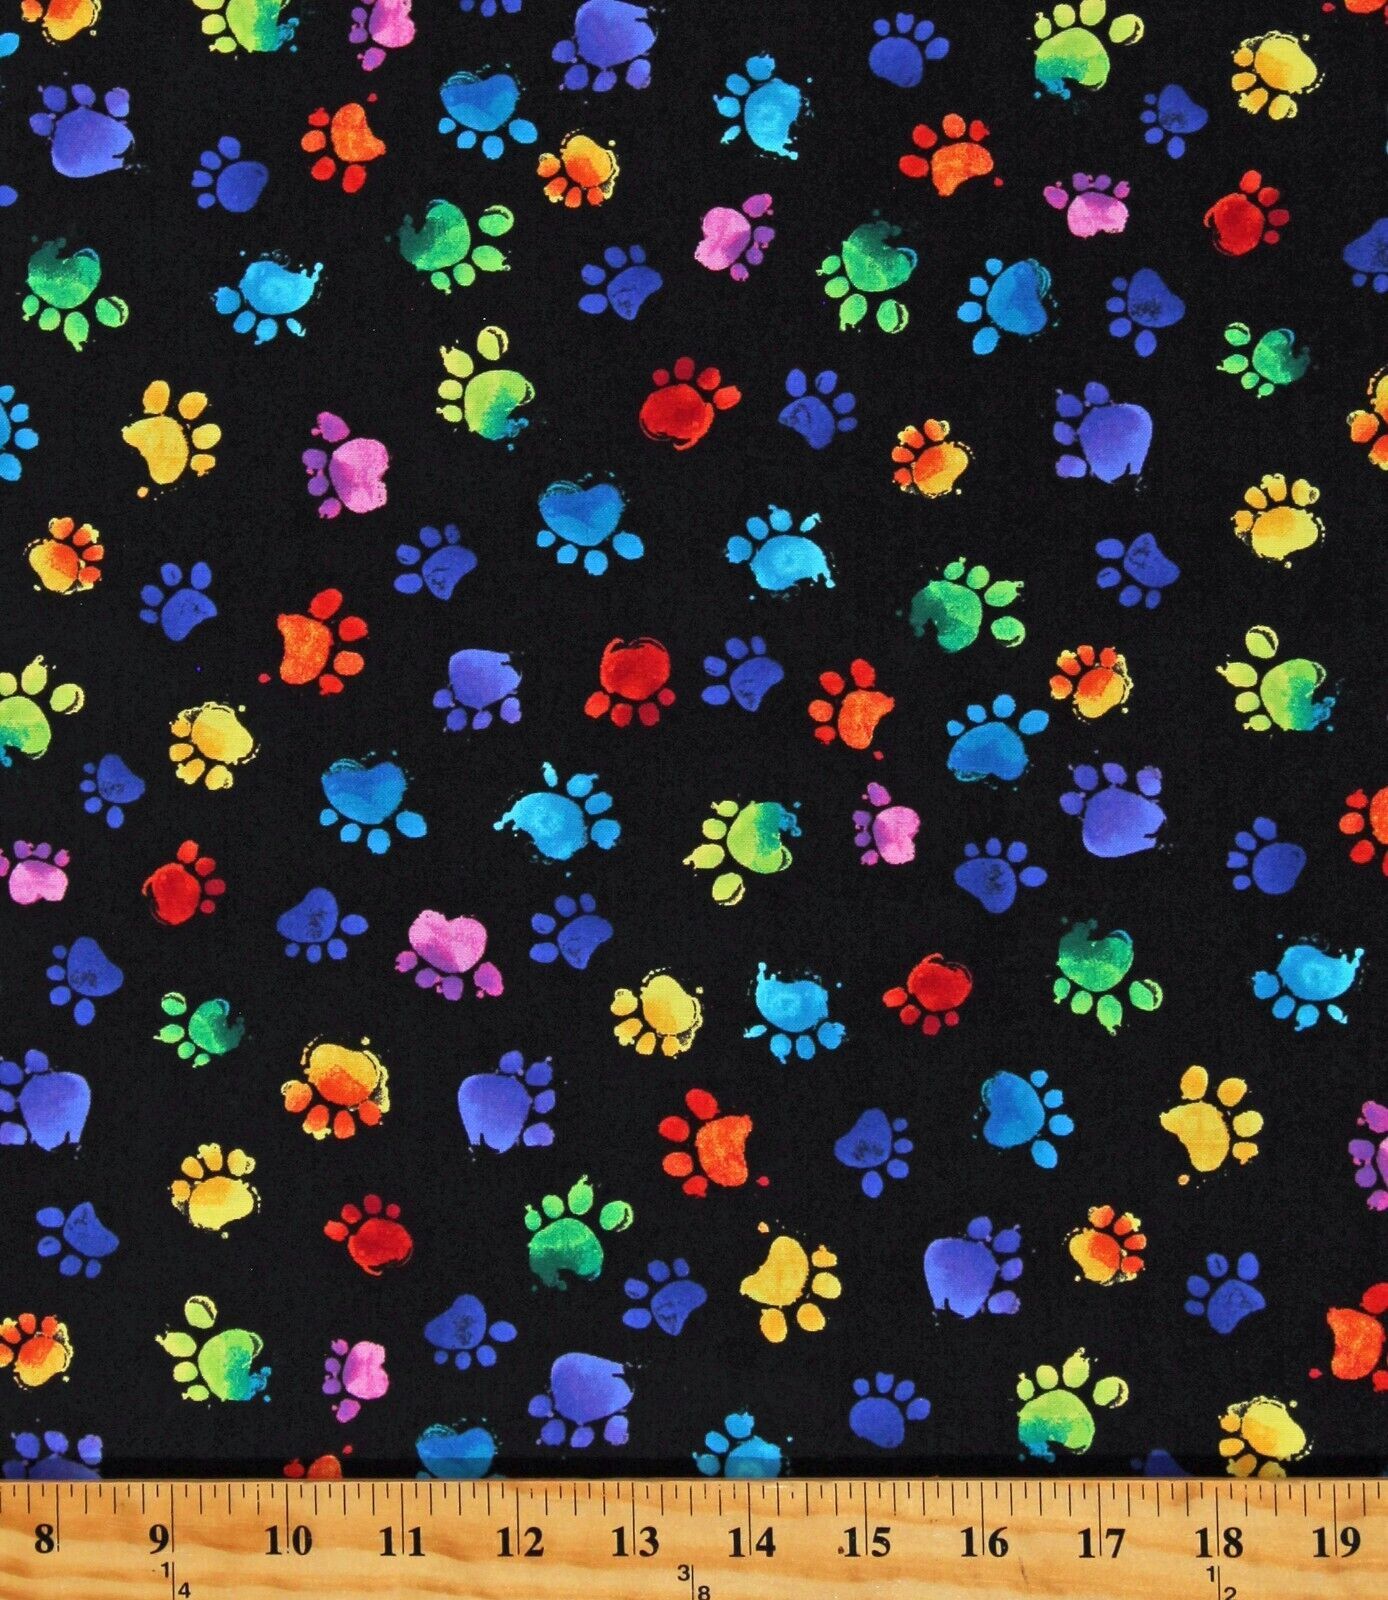 Primary image for Cotton Paw Prints Cat Kittens Rainbow on Black Fabric Print by Yard D386.29